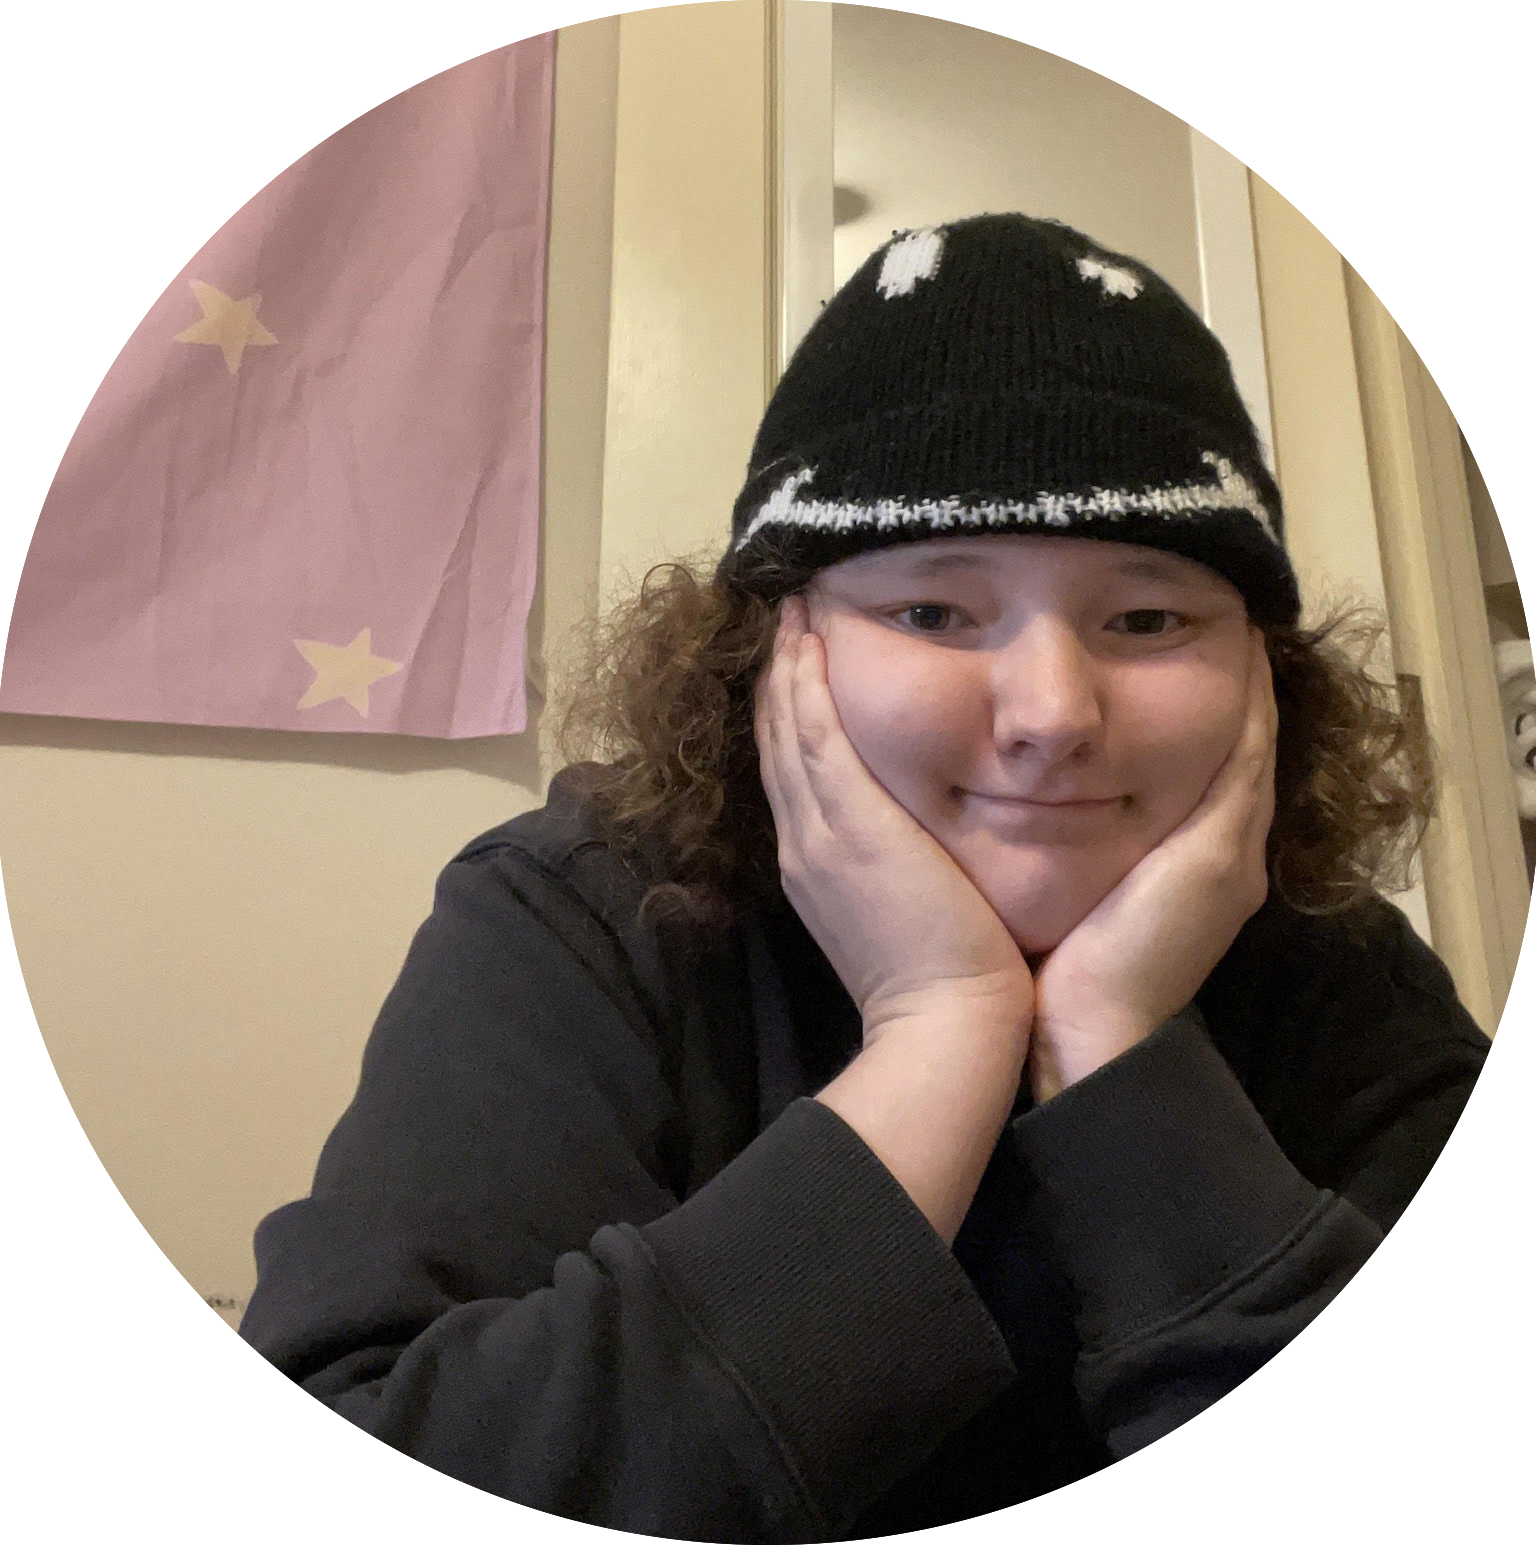 A light-skinned person with curly hair, in a black knitted cap with a monster design, rests their face in their hands and looks at the camera.